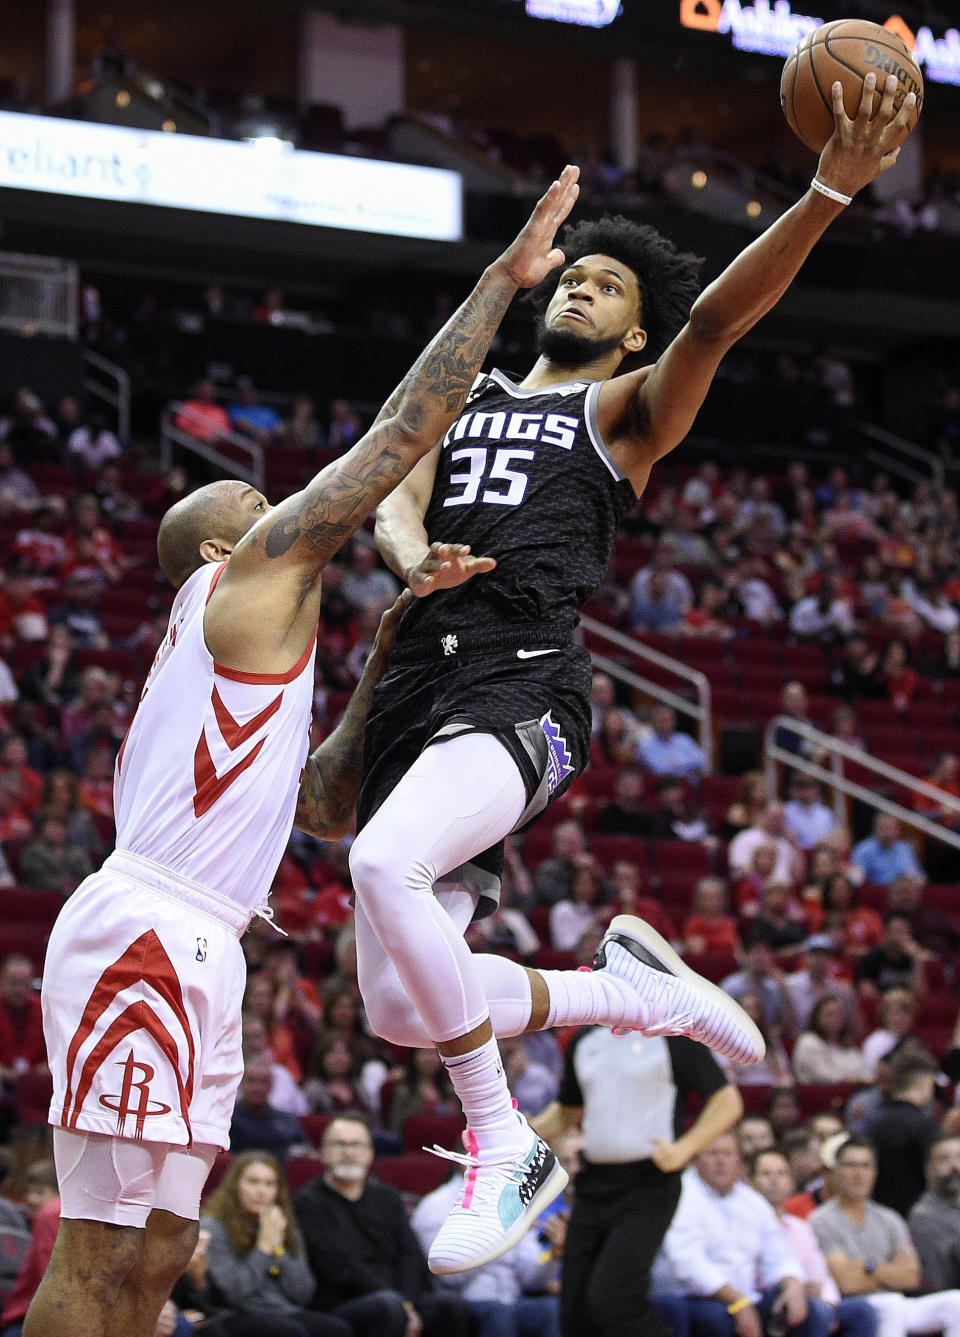 Sacramento Kings forward Marvin Bagley III (35) drives to the basket as Houston Rockets forward PJ Tucker defends during the first half of an NBA basketball game, Saturday, March 30, 2019, in Houston. (AP Photo/Eric Christian Smith)